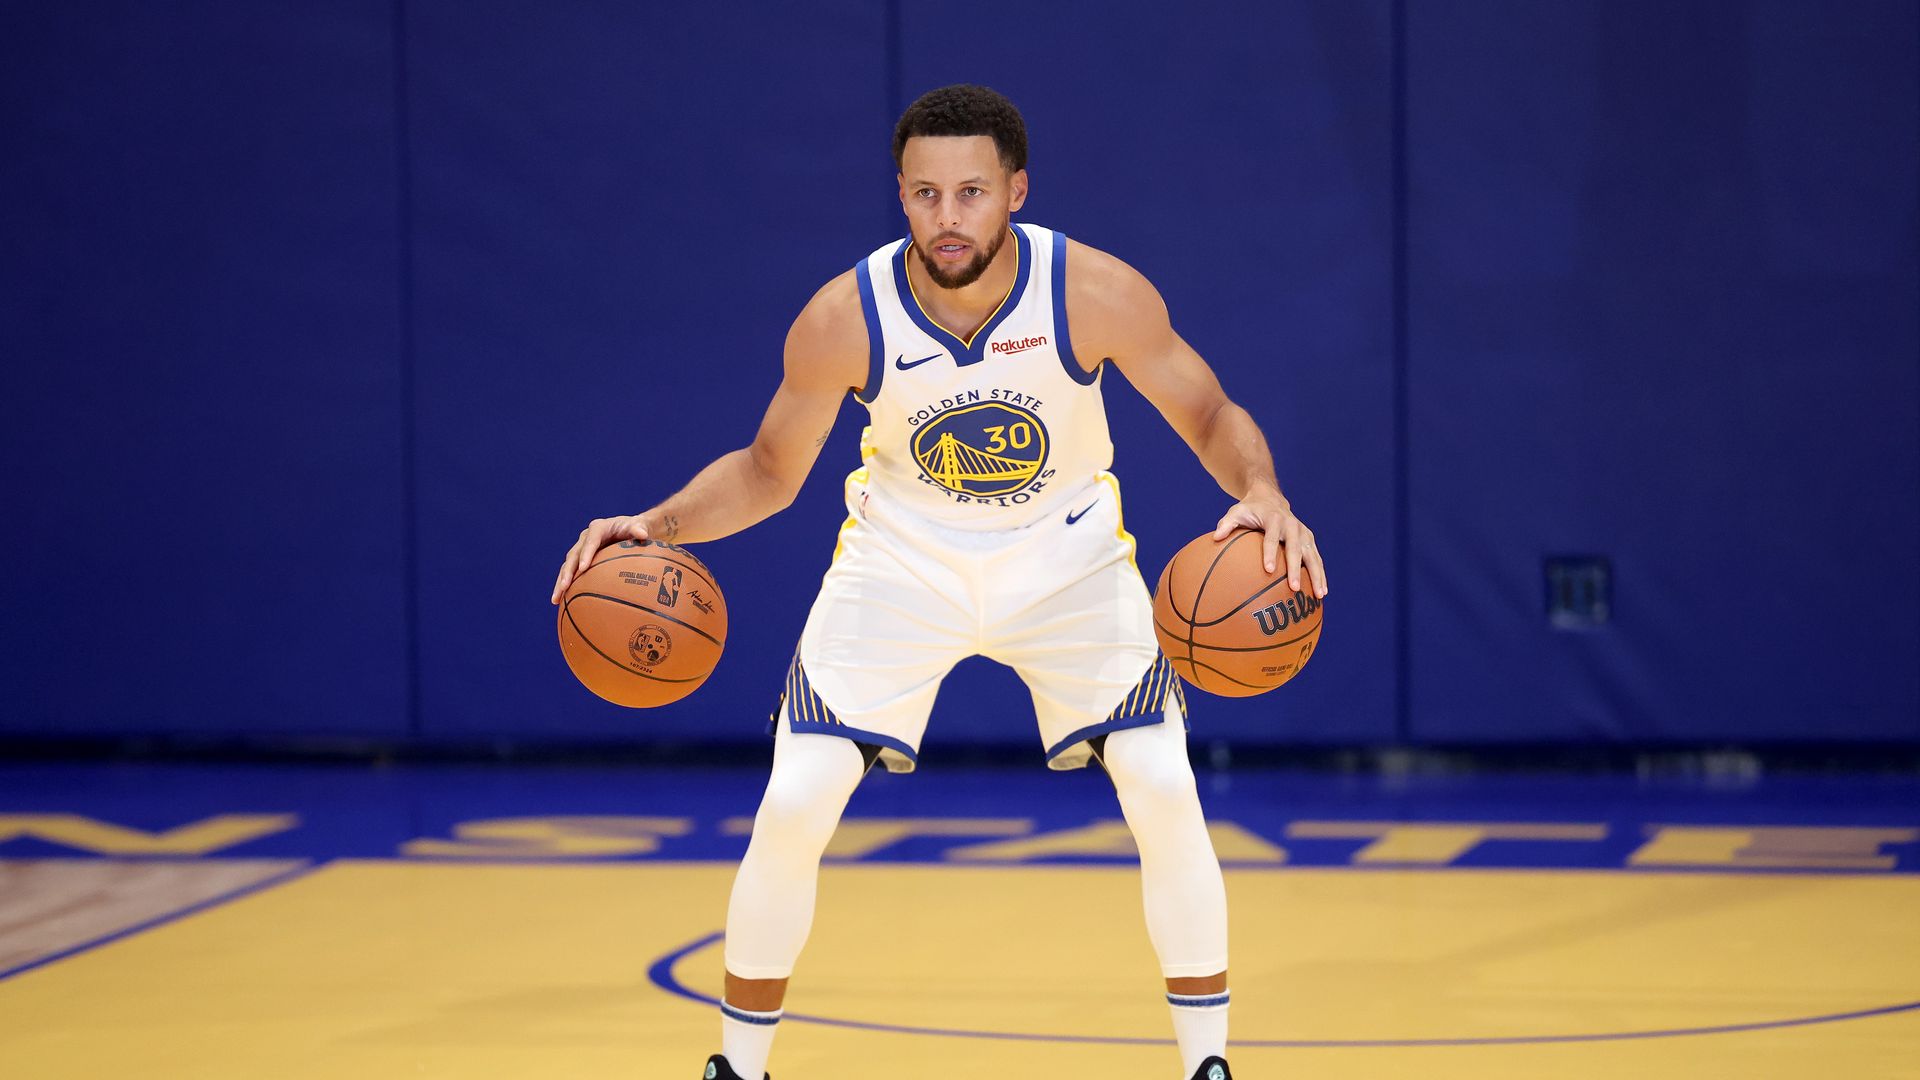 Photo of Stephen Curry dribbling two basketballs, one in each hand